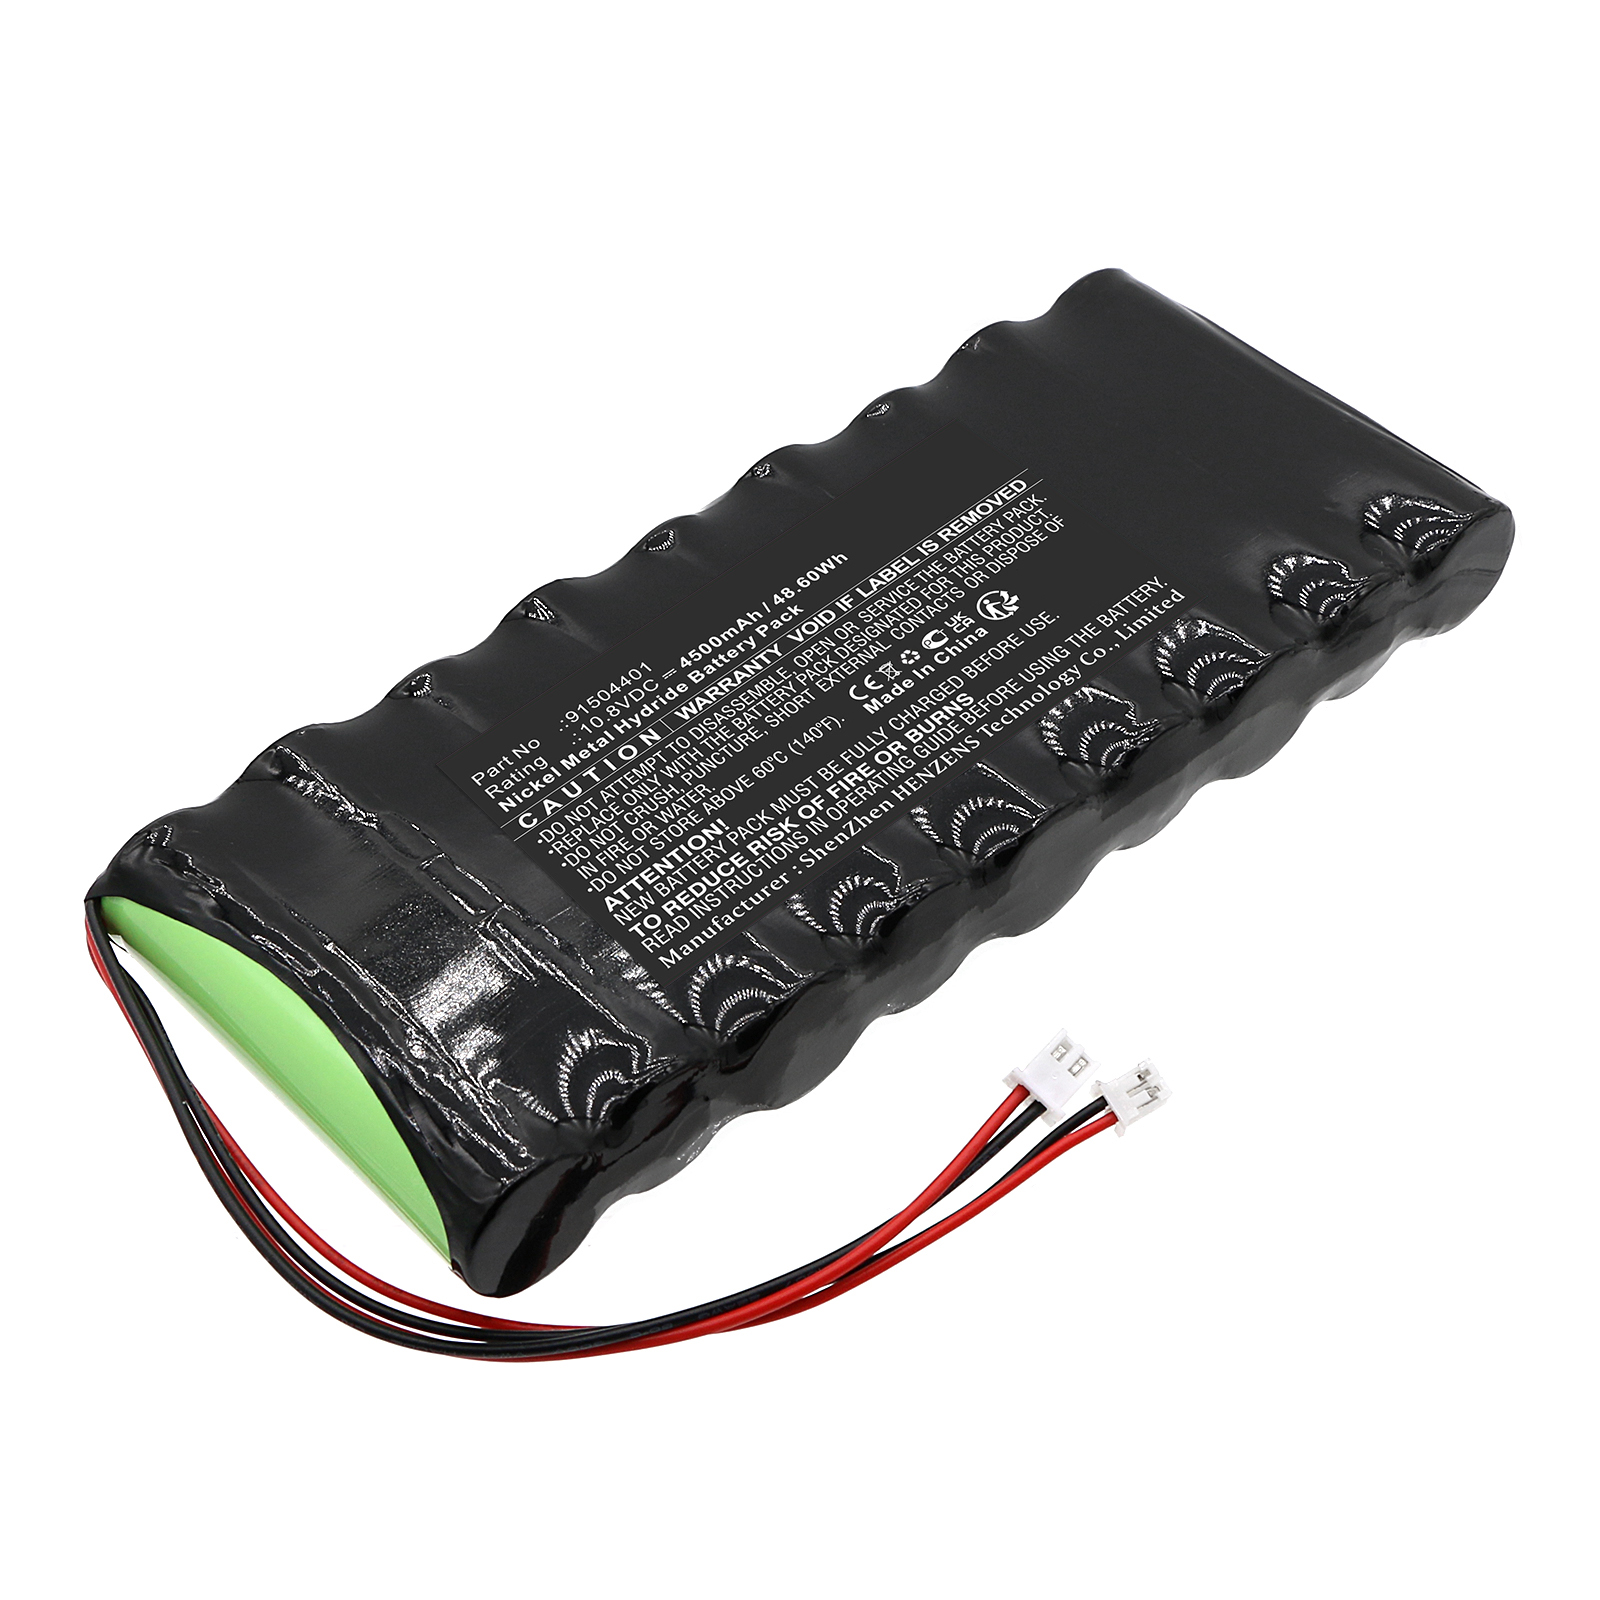 Synergy Digital Equipment Battery, Compatible with Technisat 91504401 Equipment Battery (Ni-MH, 10.8V, 4500mAh)